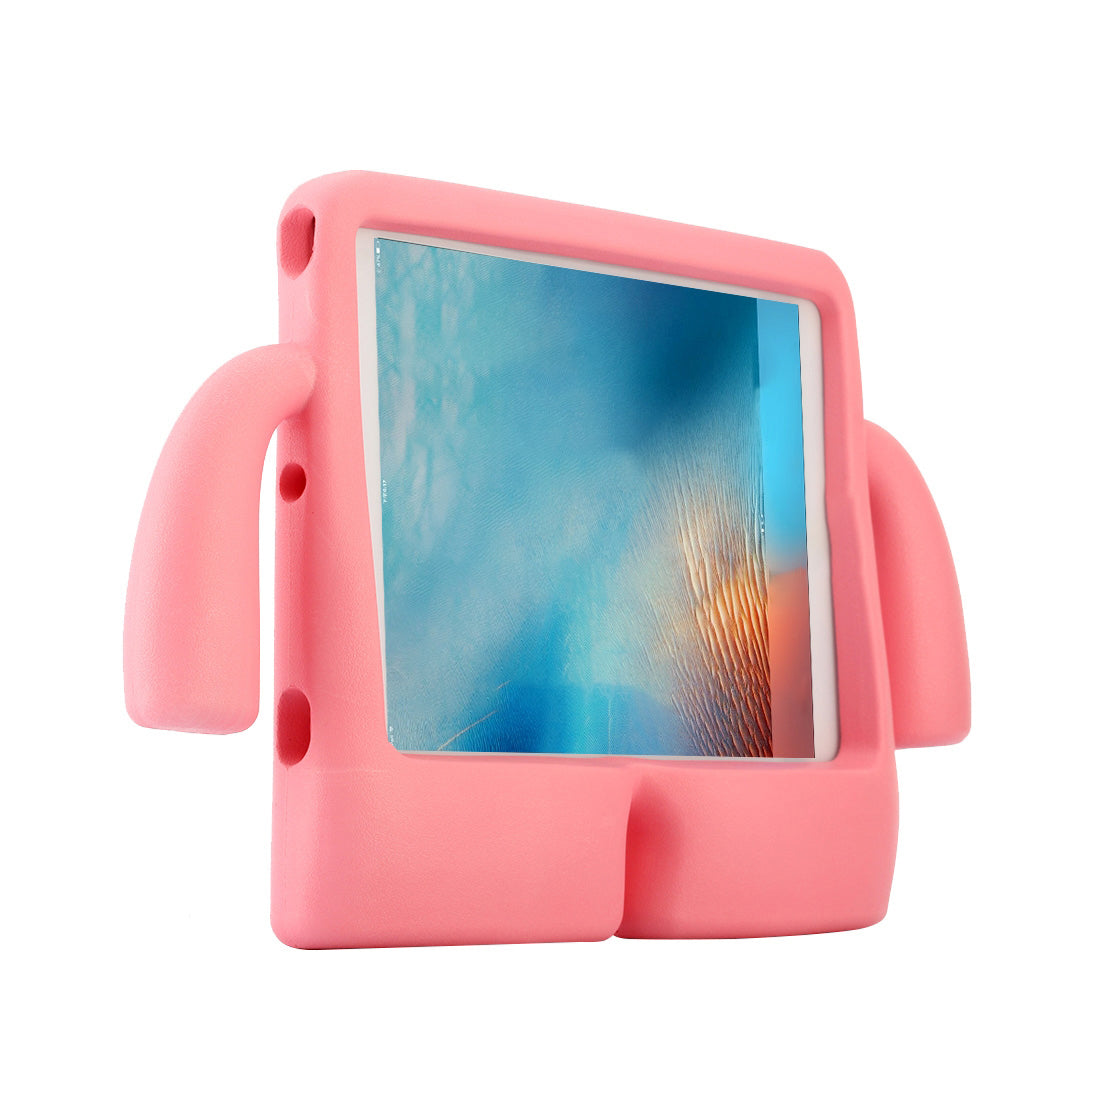 For Apple iPad Mini 1 / 2 / 3 Kids Case Shockproof Cover With Carry Handle - Pink